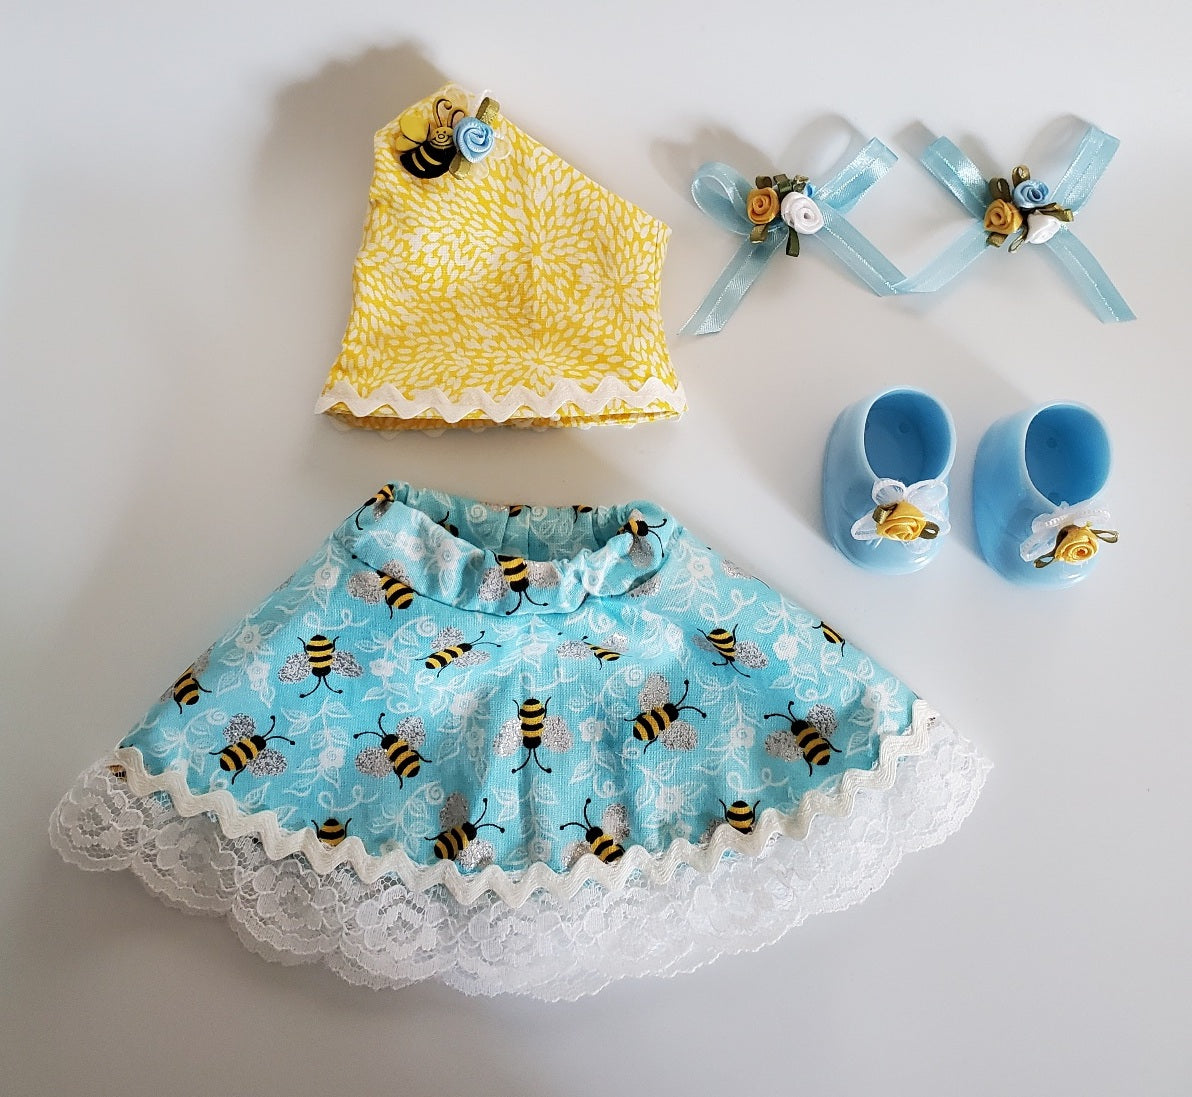 Handmade Doll and doll clothing,Bee Design "Buzzing Bee"